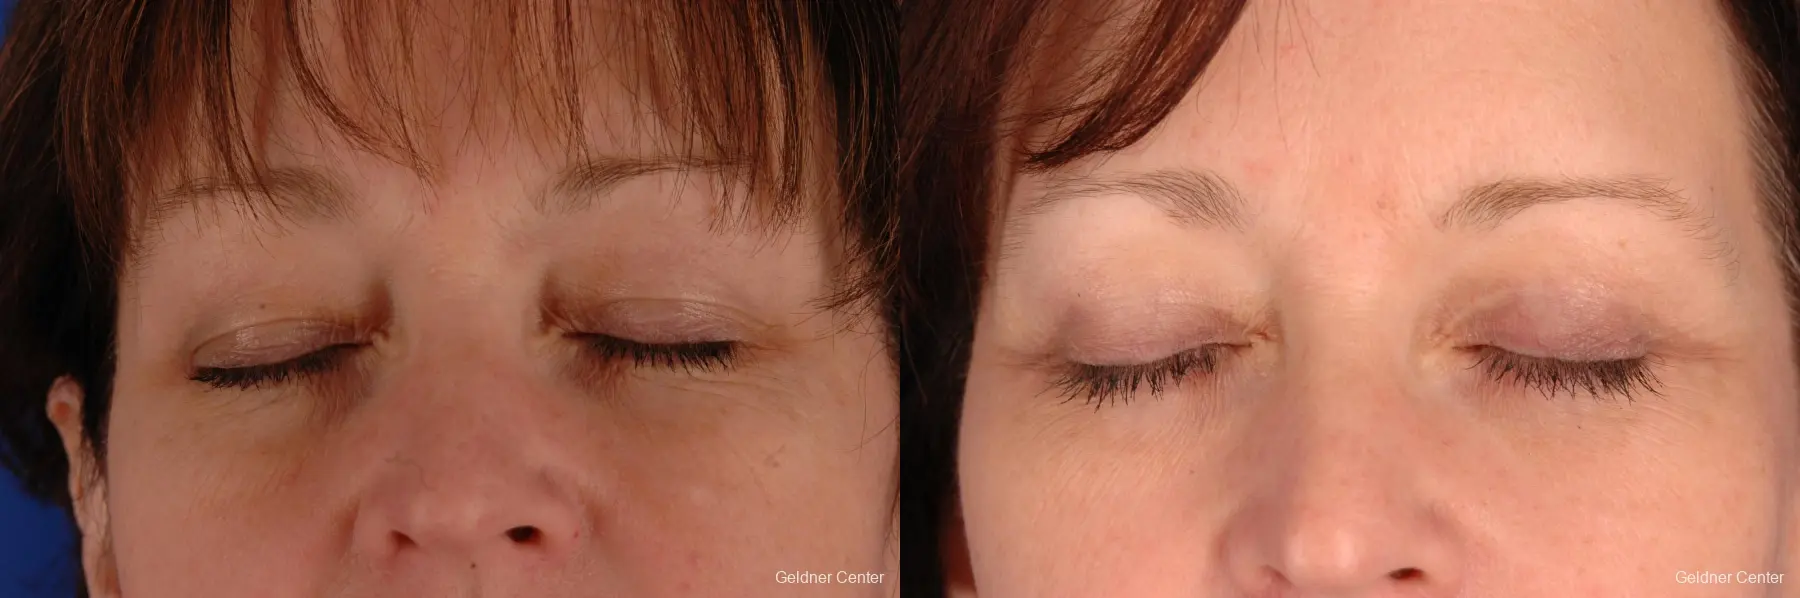 Chicago Eyelid Lift 2323 - Before and After 2